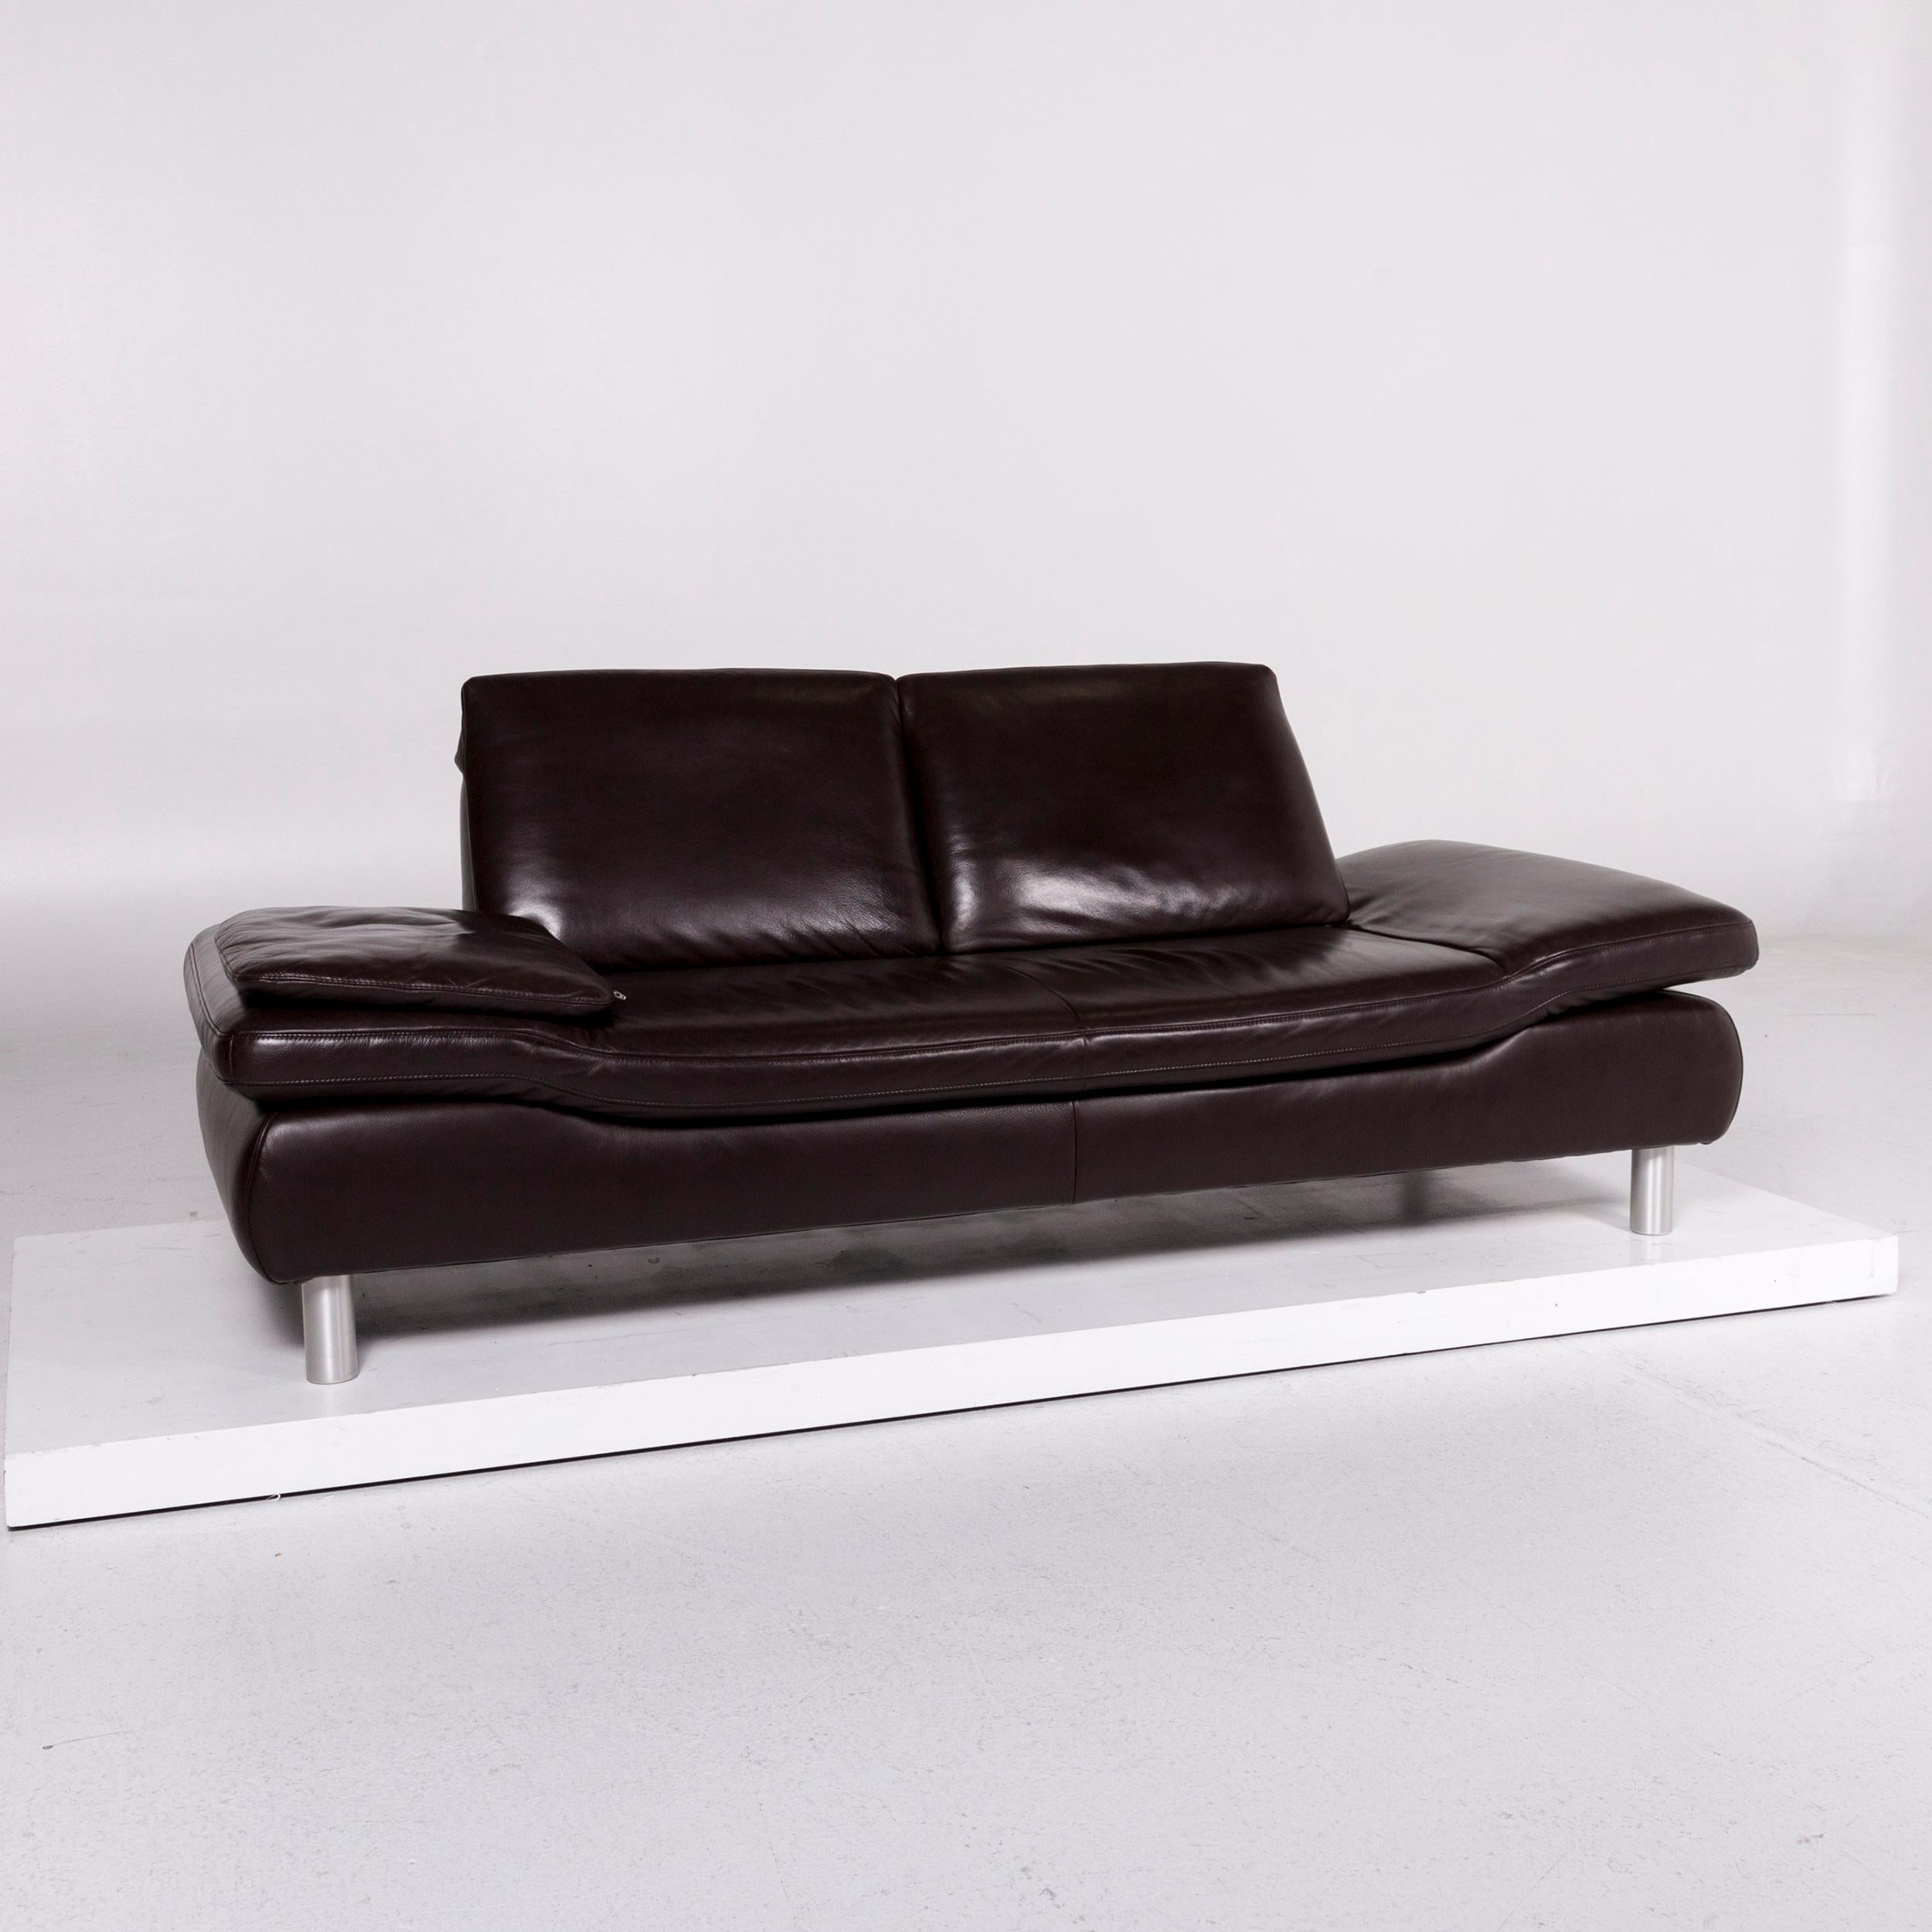 We bring to you a Koinor Rossini leather sofa set dark brown 2 two-seat.
 
 Product measurements in centimeters:
 
Depth 86
Width 210
Height 80
Seat-height 41
Rest-height 45
Seat-depth 52
Seat-width 125
Back-height 39.
 